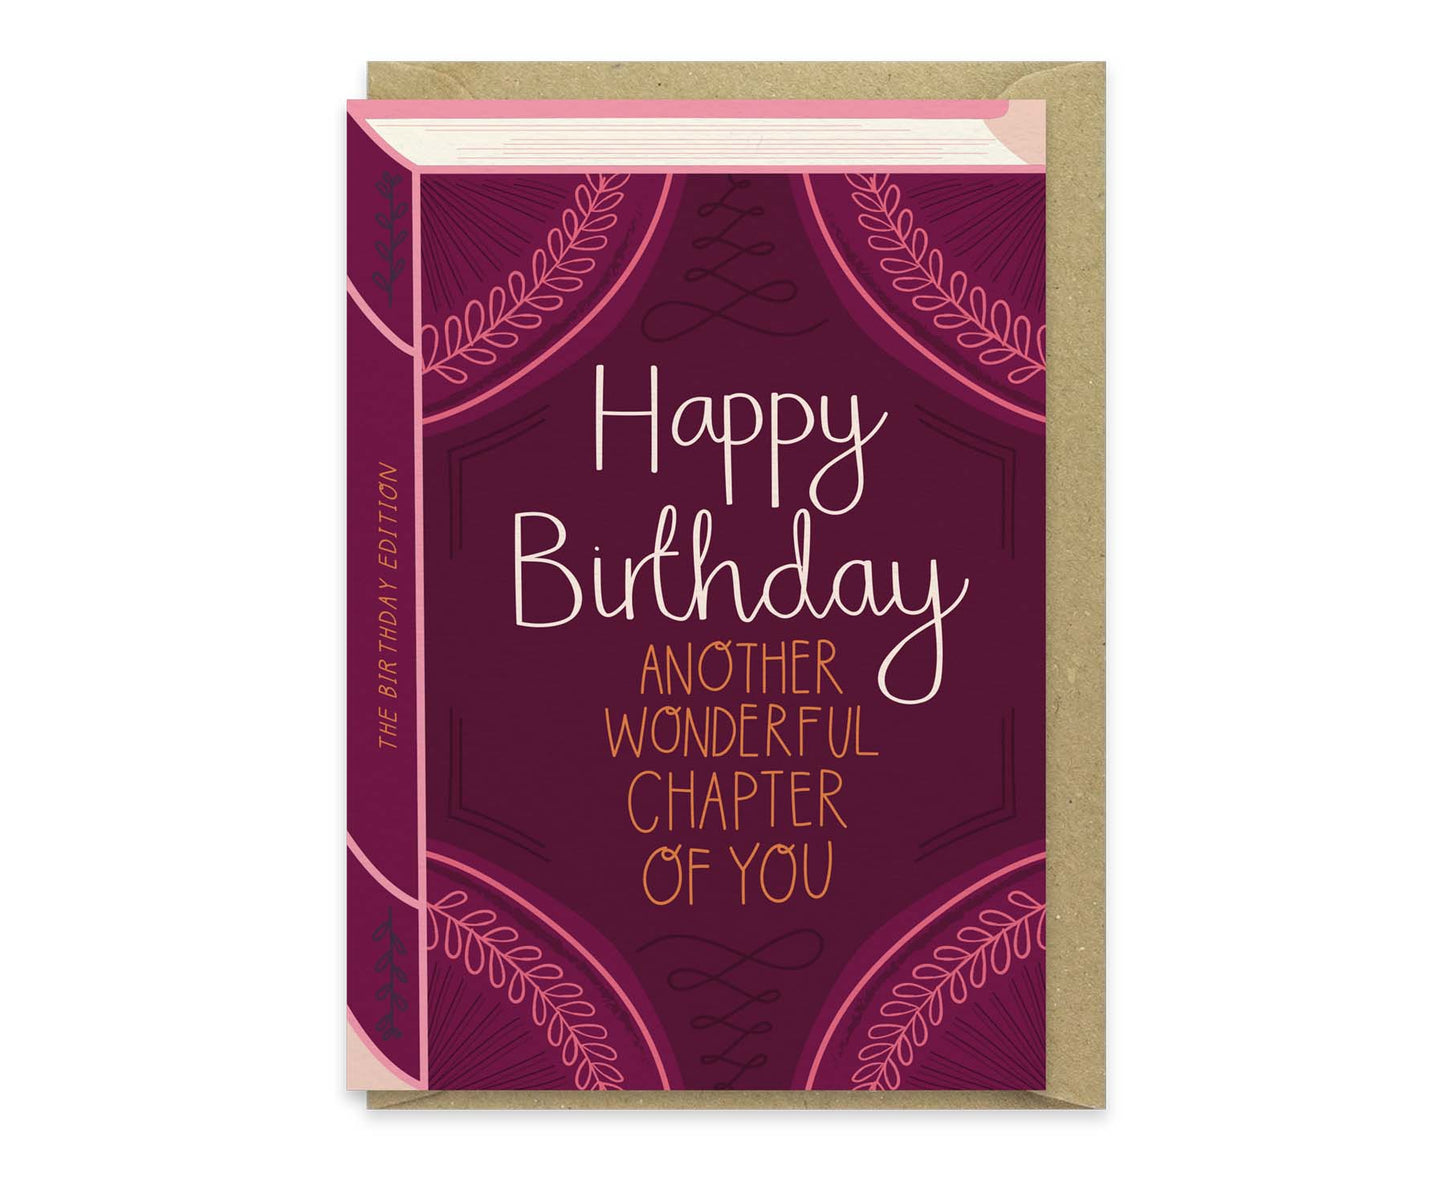 Another Wonderful Chapter Of You Book Birthday Card